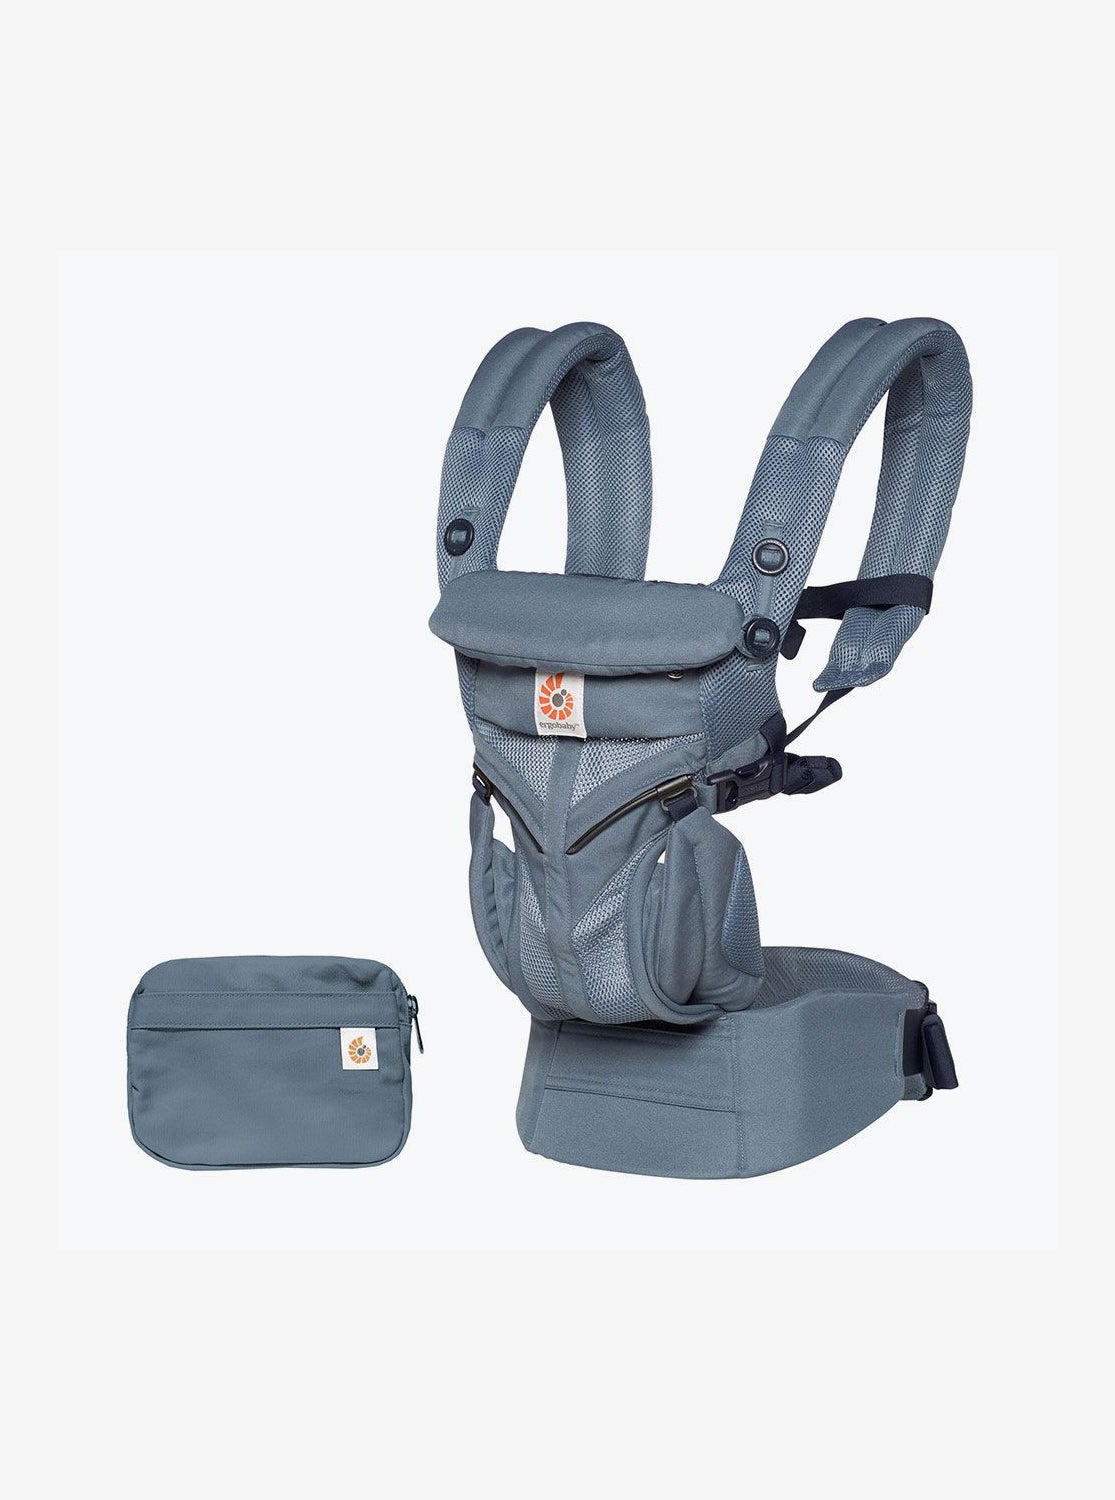 ERGOBABY Omni 360 Cool Air Mesh Baby Carrier - Oxford Blue